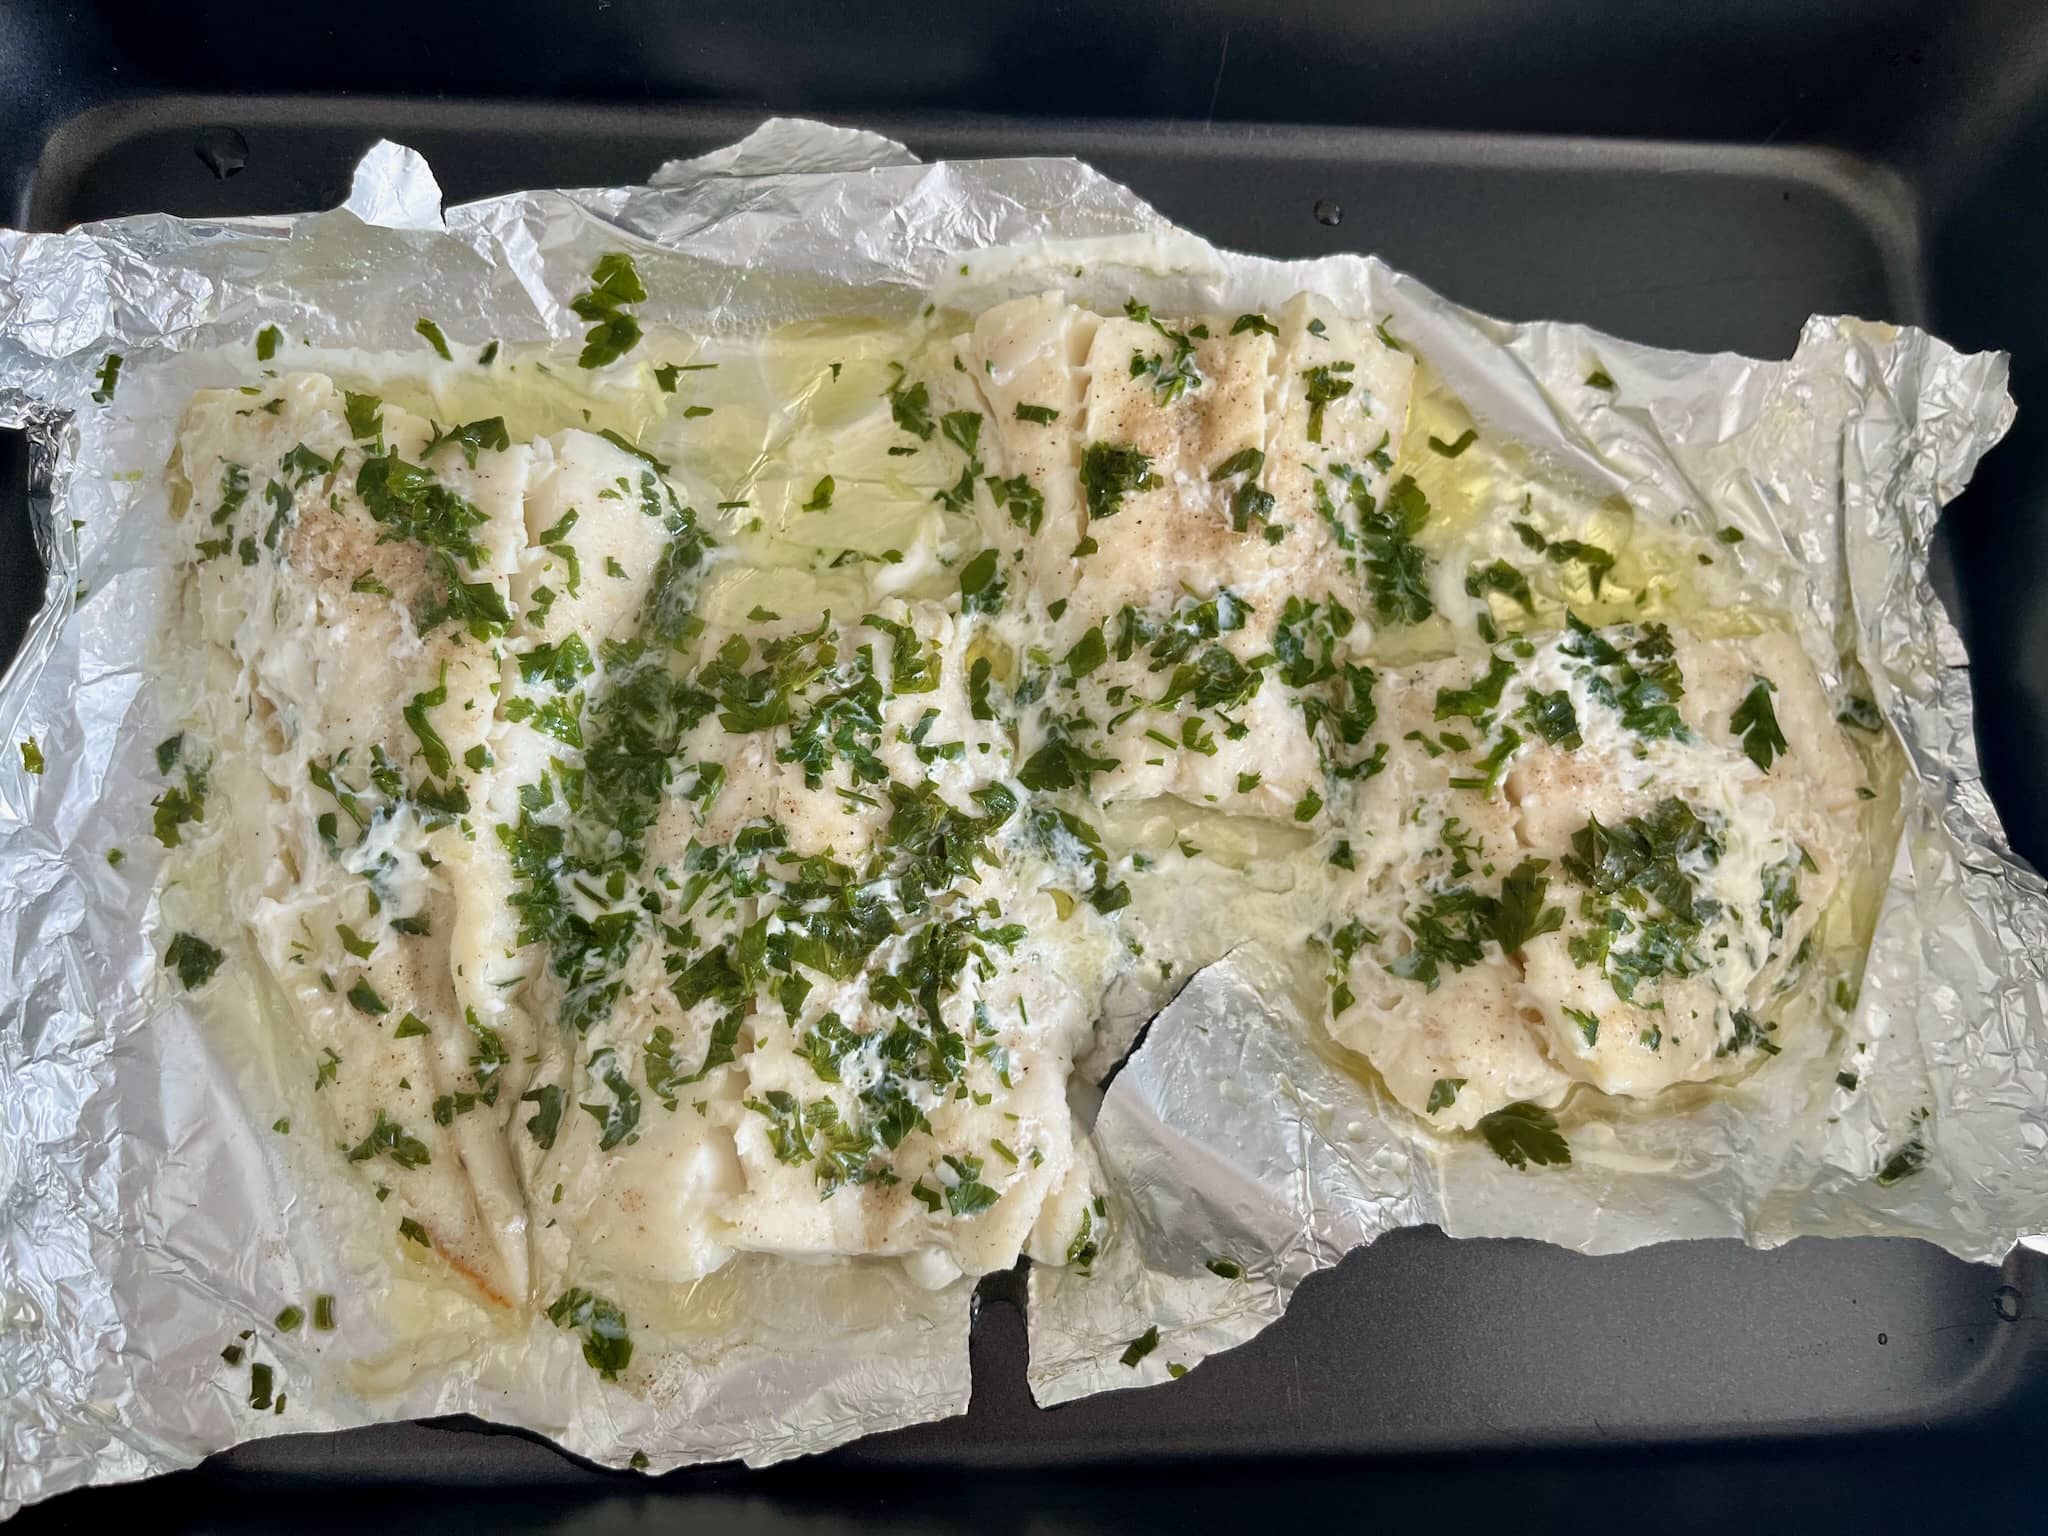 Simple Oven-Baked Fish, still on a baking tray, out from the oven.